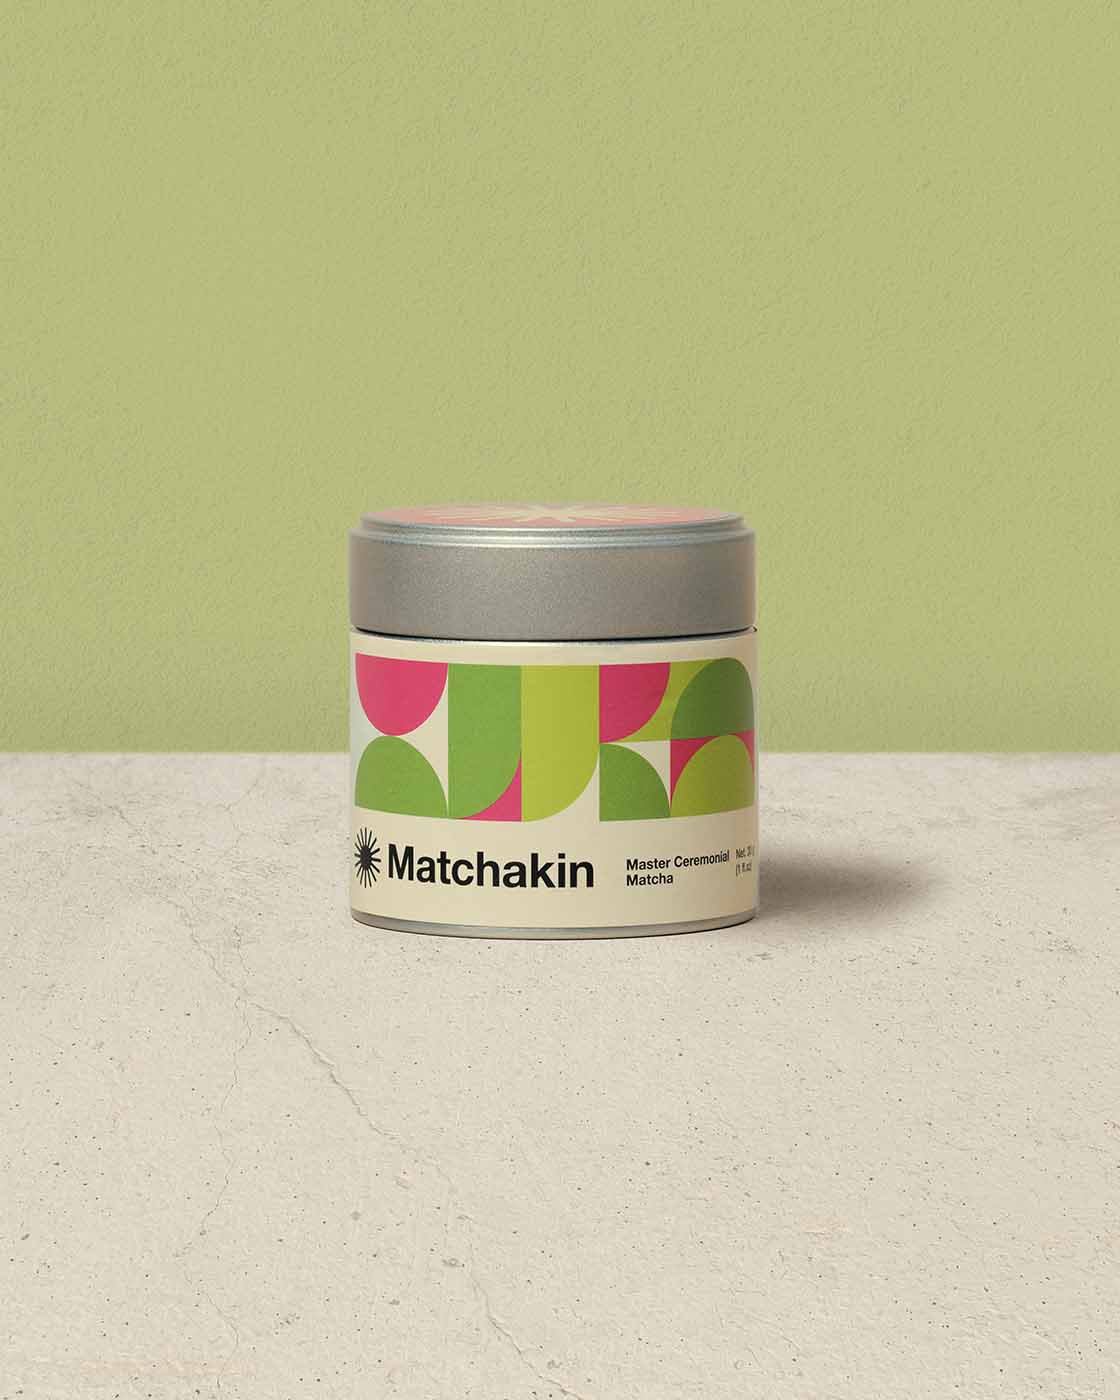 Master Ceremonial Matcha, made in Japan. An absolute gem of quality and taste, available only at Matchakin, 30 grams in tins